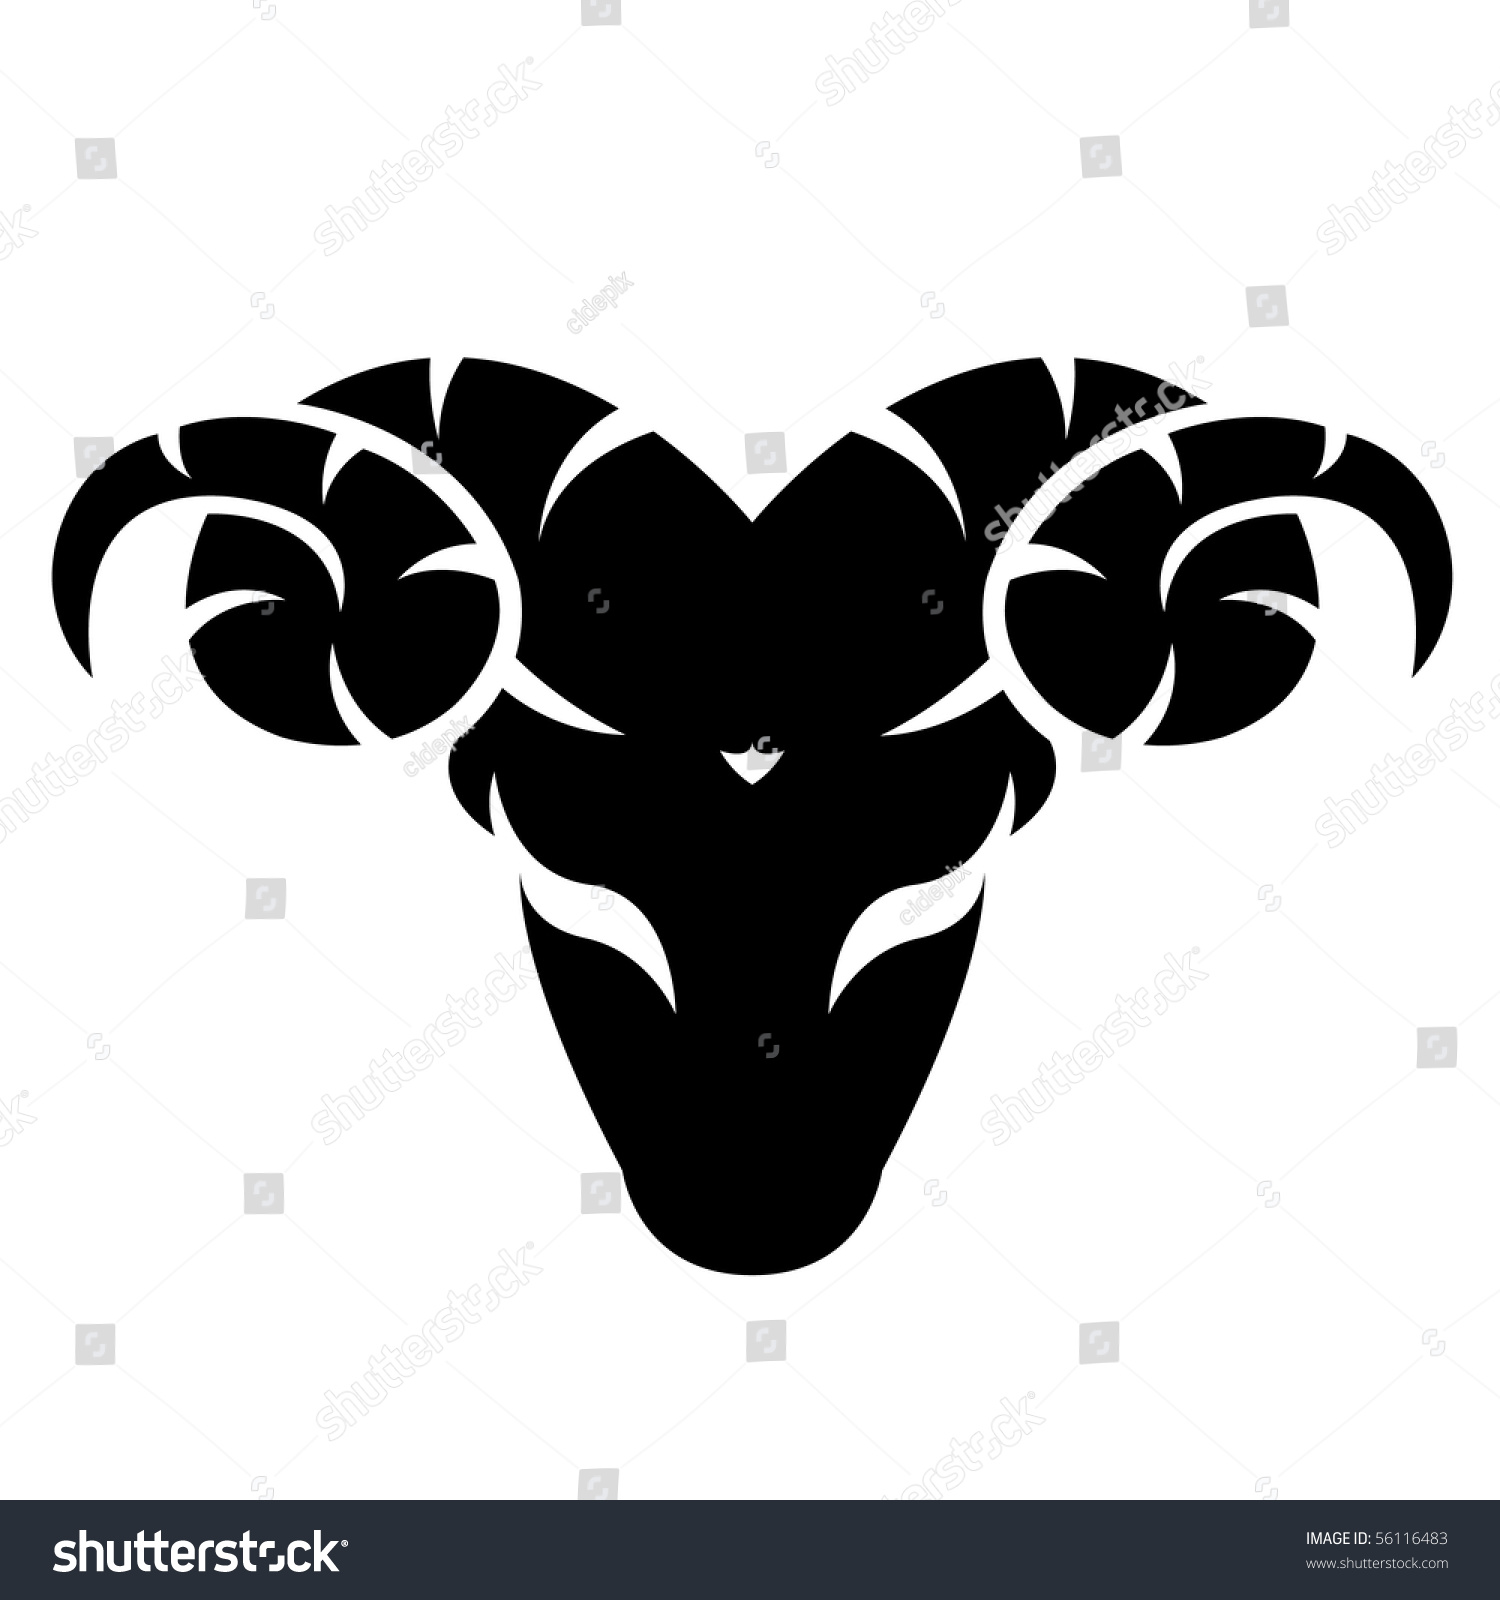 Black Aries Isolated On White Stock Vector Illustration 56116483 ...